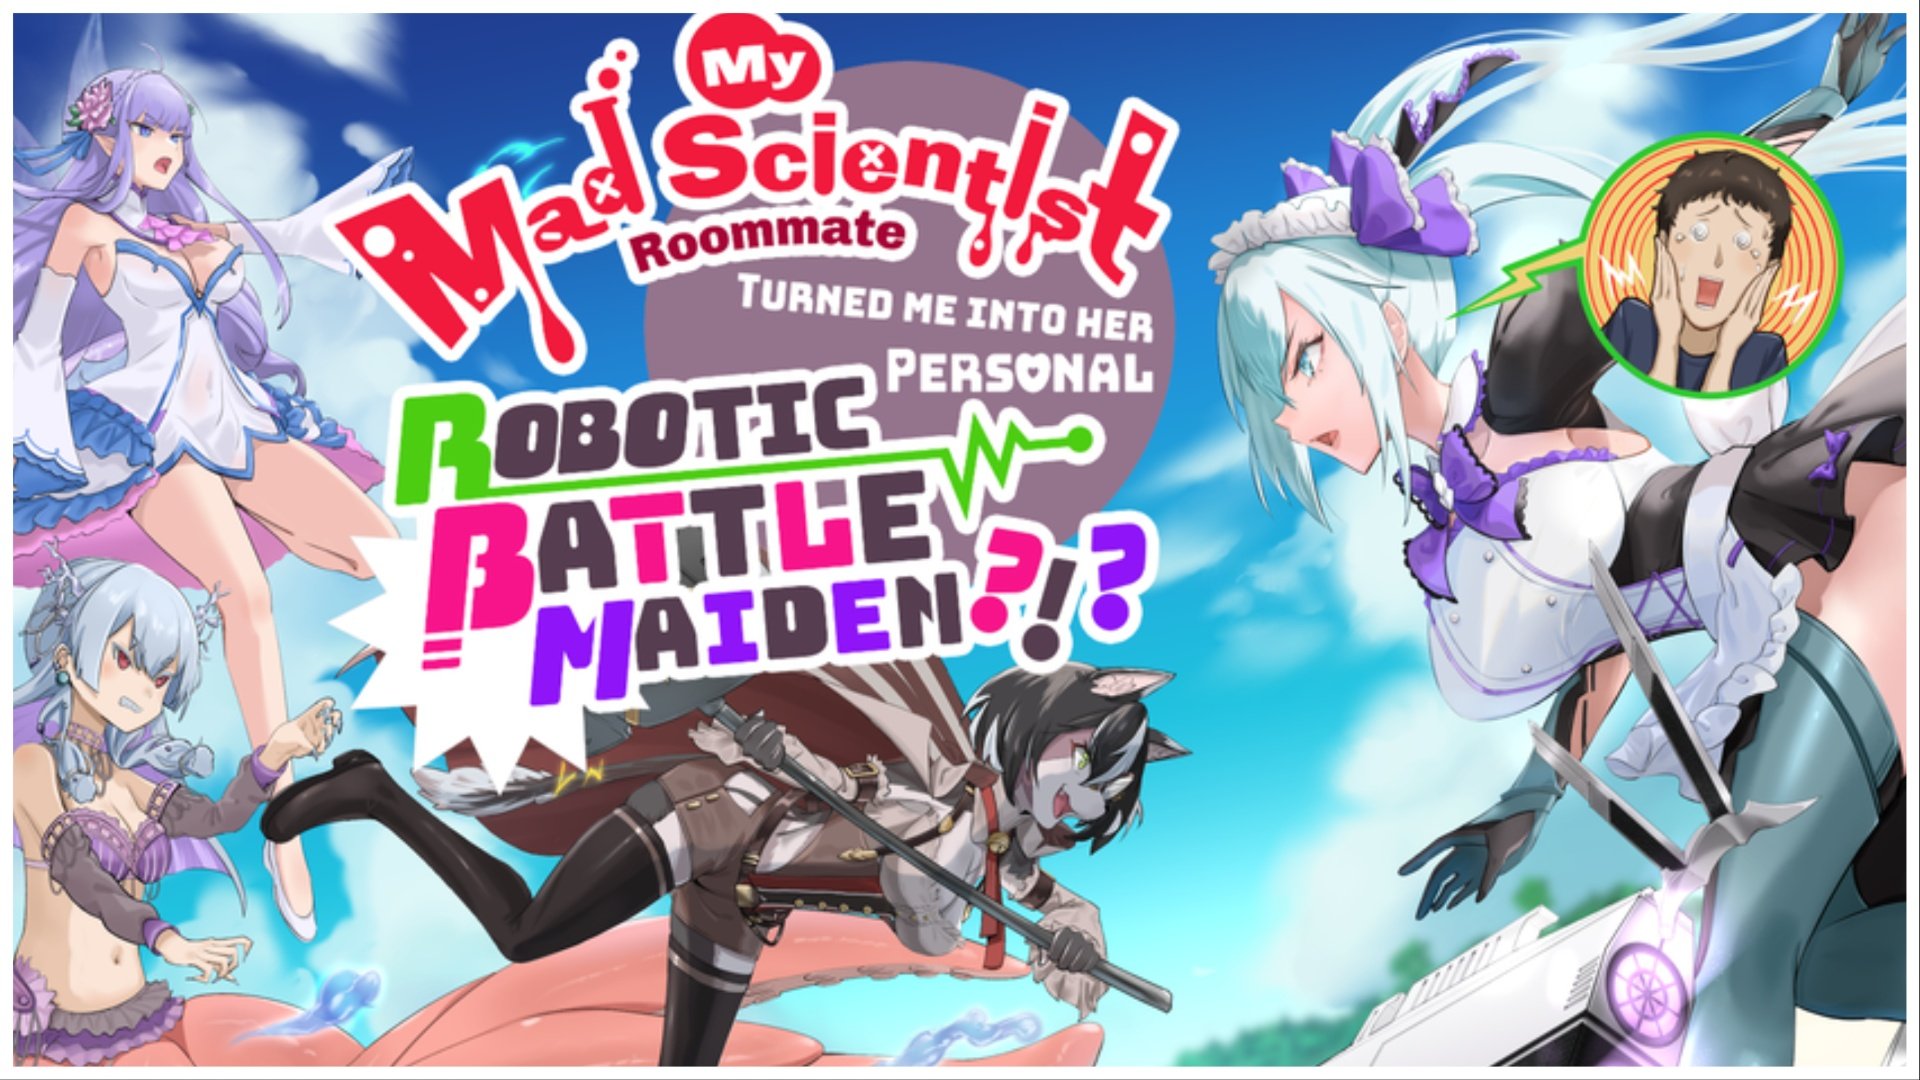 The image shows a bunch of unique characters with animalian appearances and maid outfits facing one another in what is probably the rumoured civil war. The game title is colourful and bold in the middle